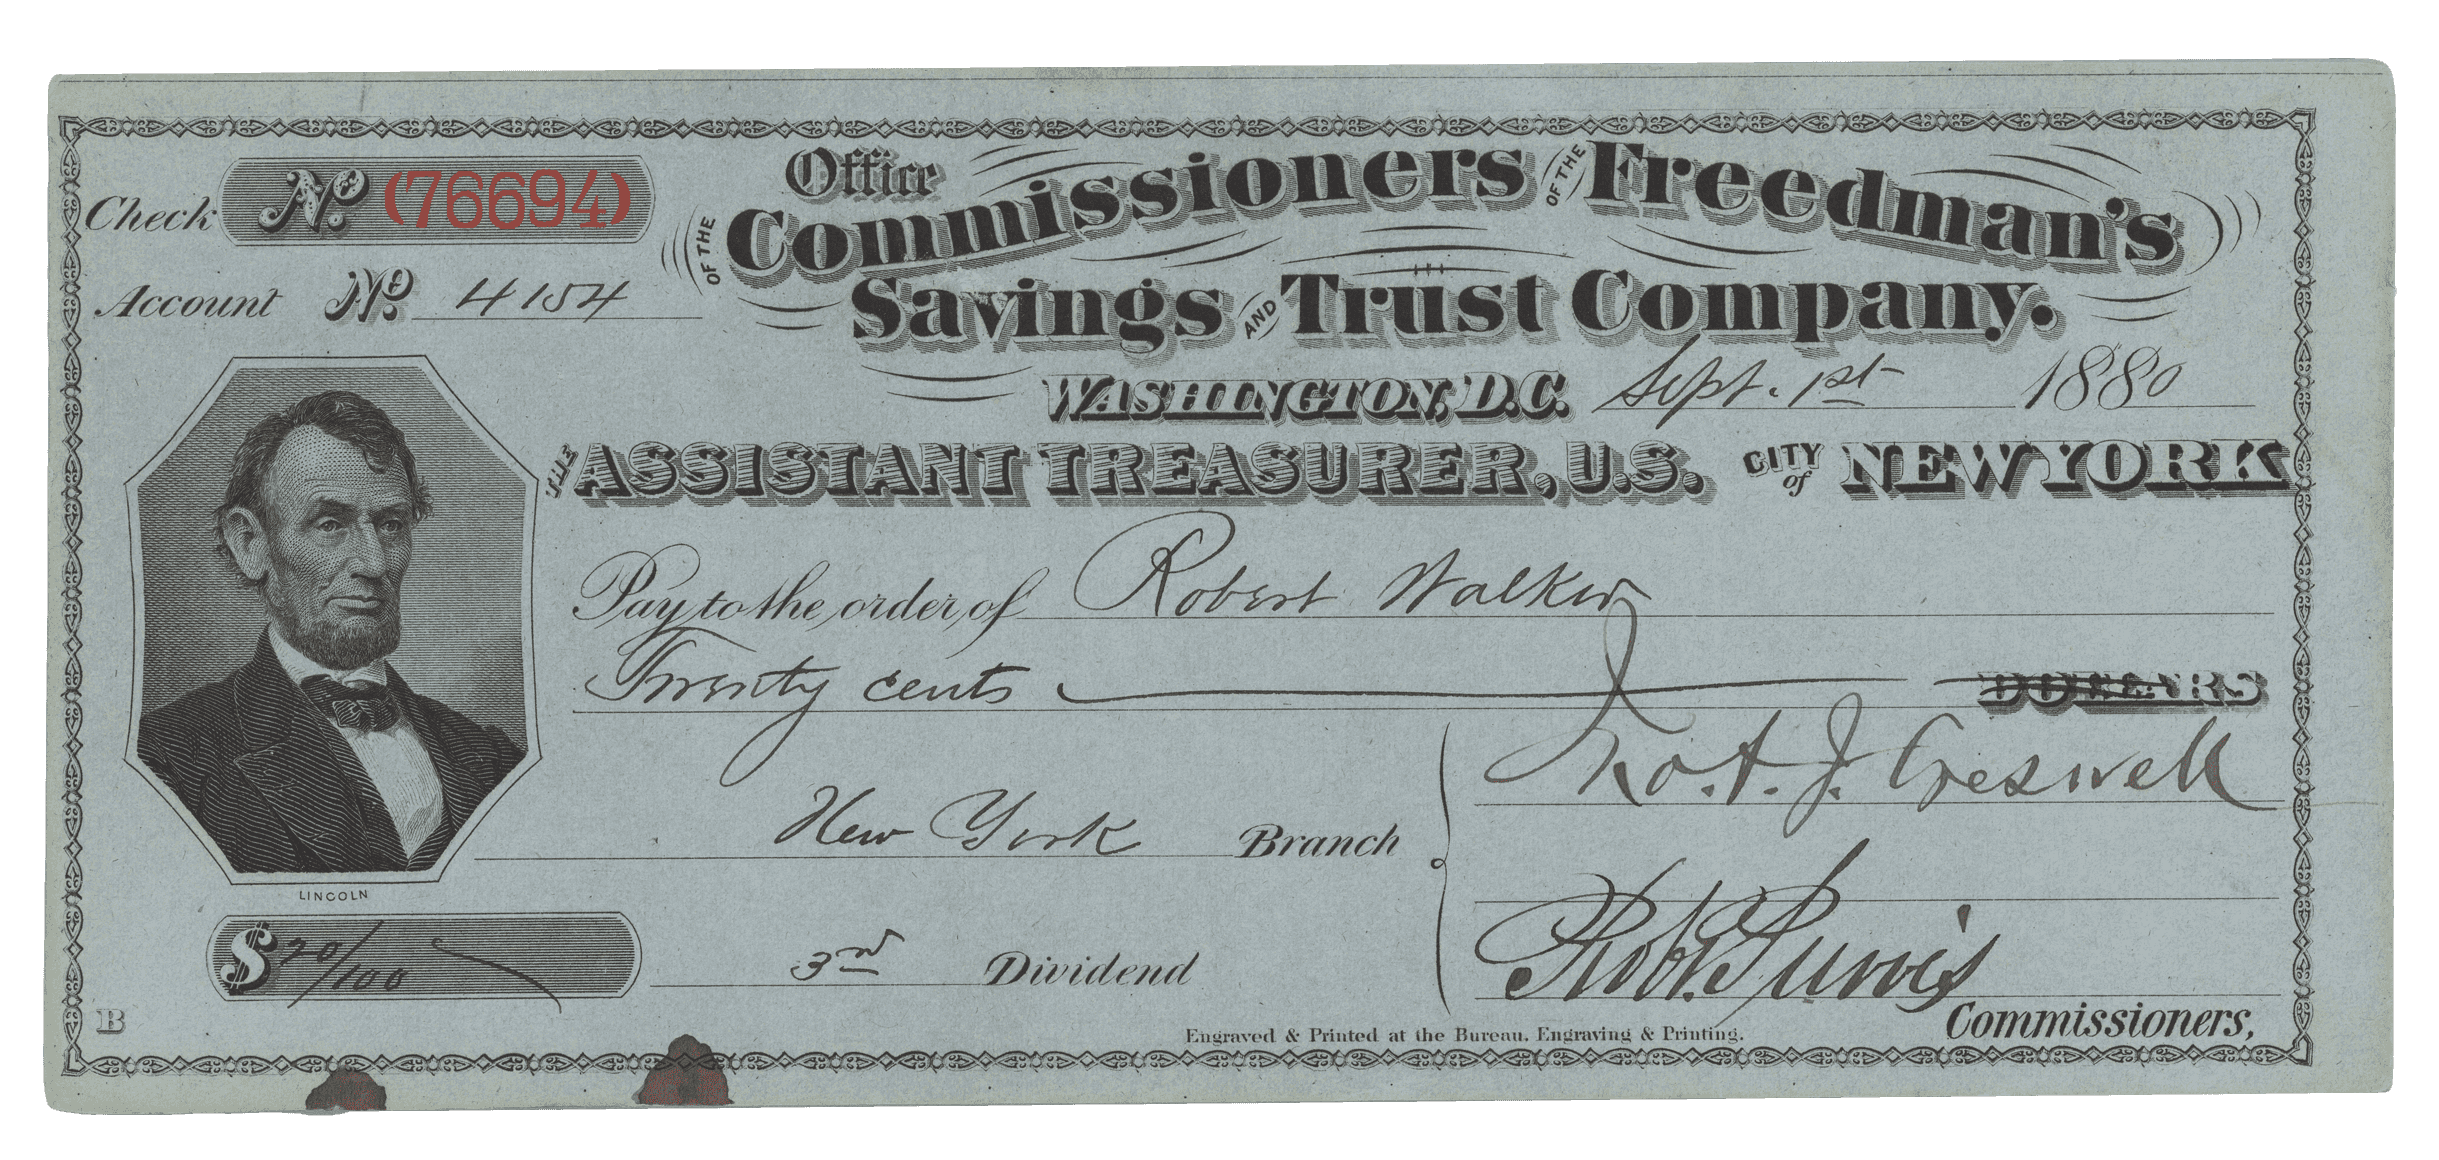 A blue dividend check by Robert Walker. Dated Sept 1st, 1880 for 20 cents.